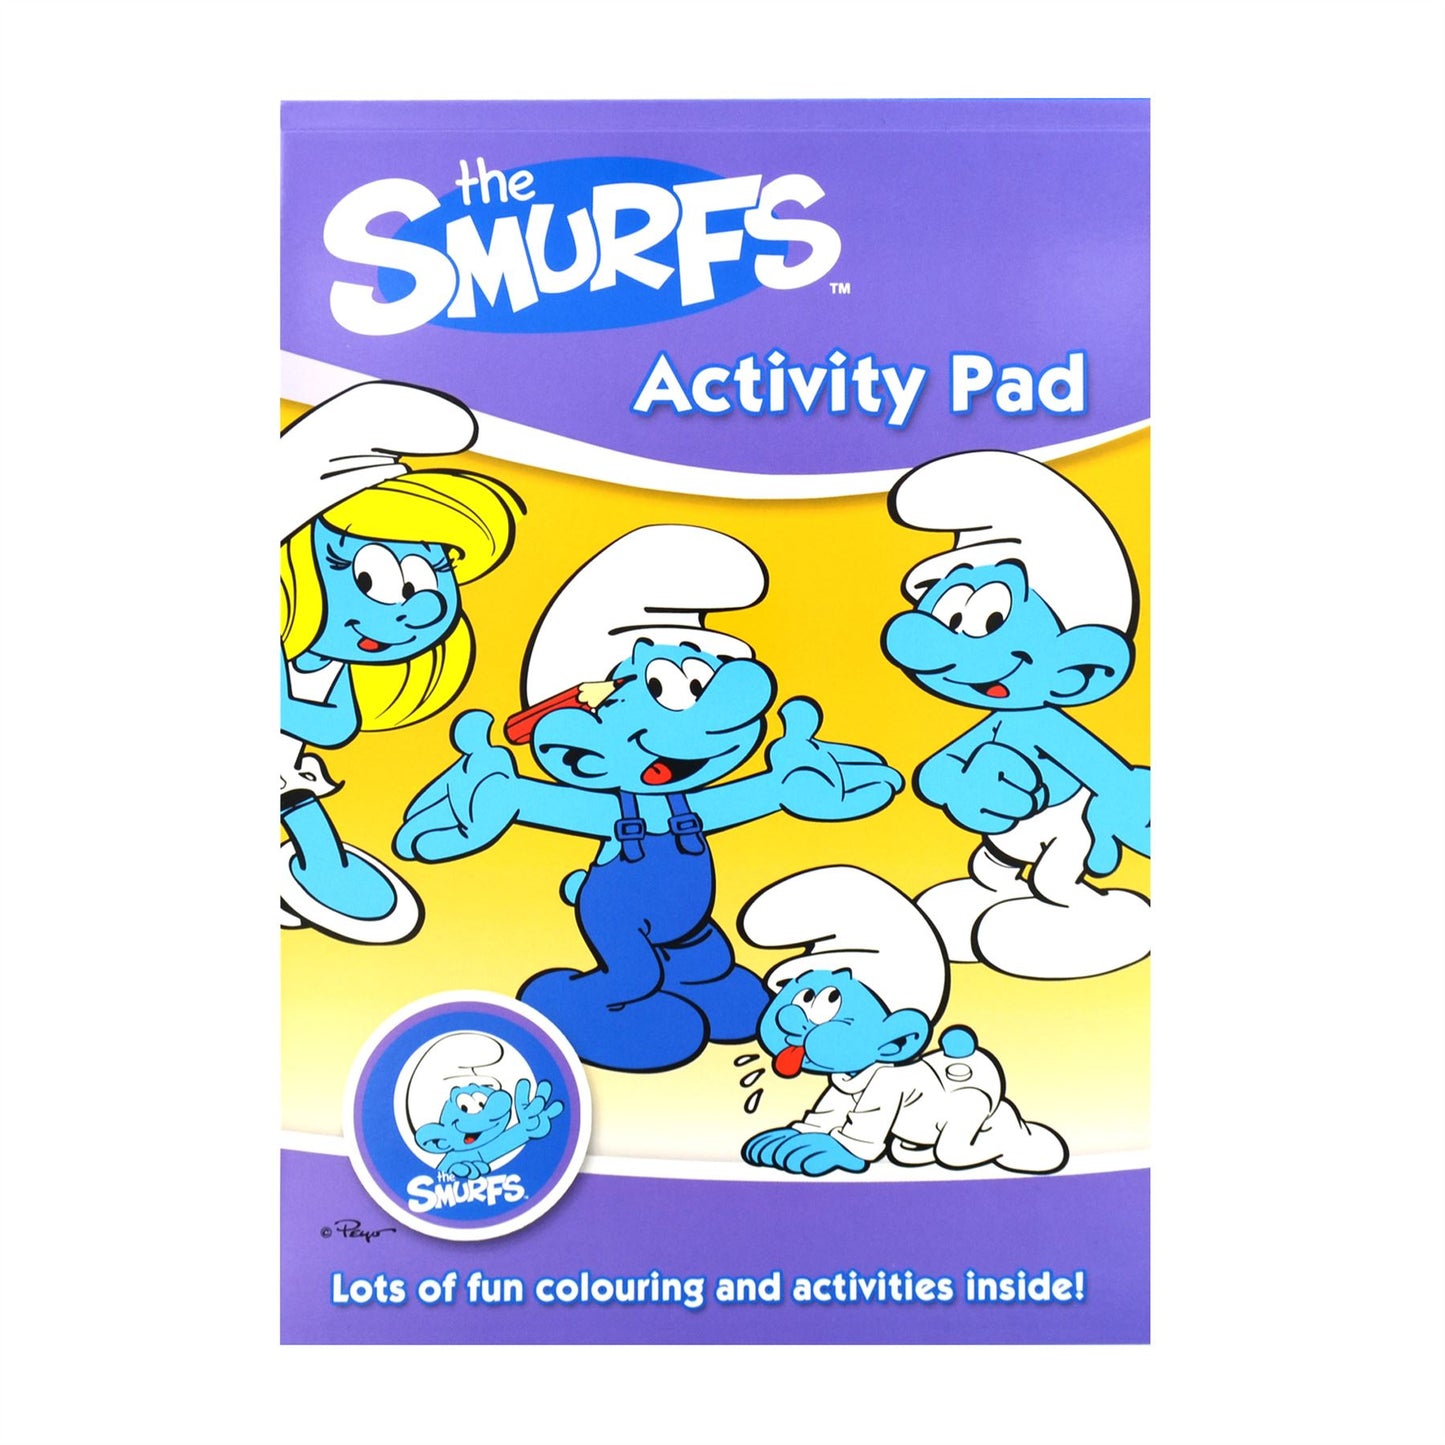 Assorted A4 Activity Books for Kids with Puzzles, Stories, and Coloring Pages